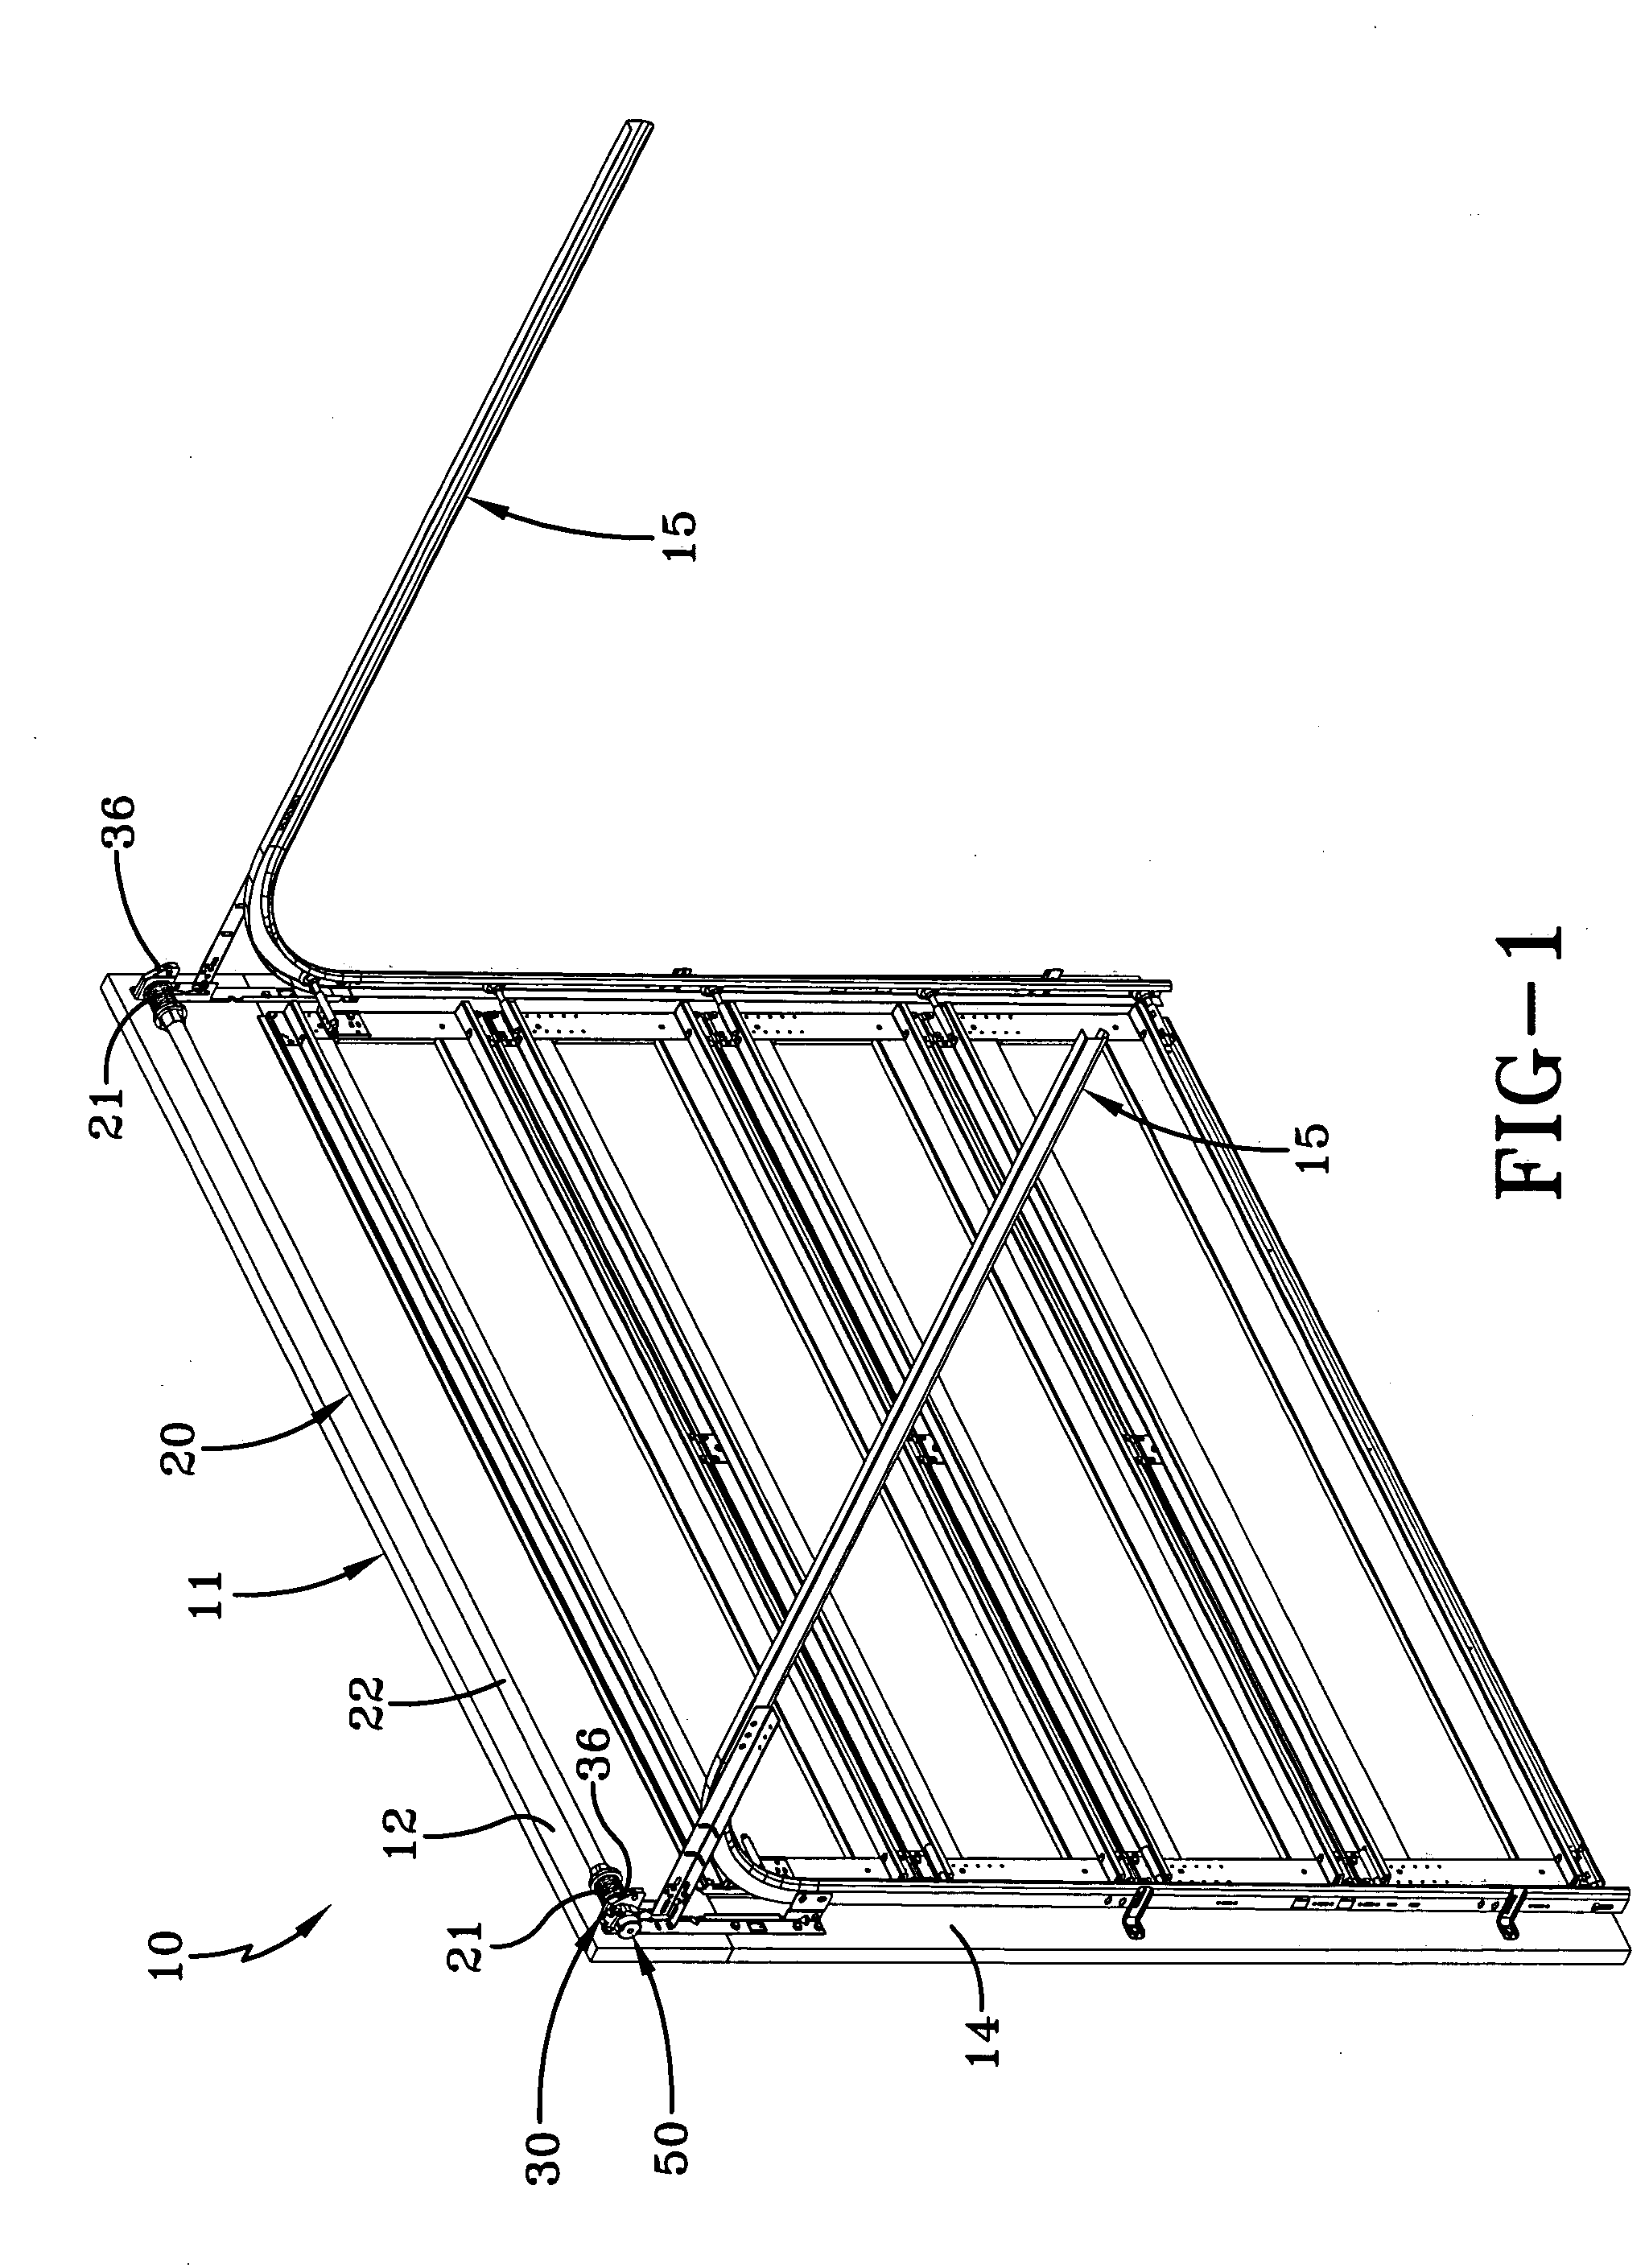 Tensioning tool for a counterbalance system for sectional doors